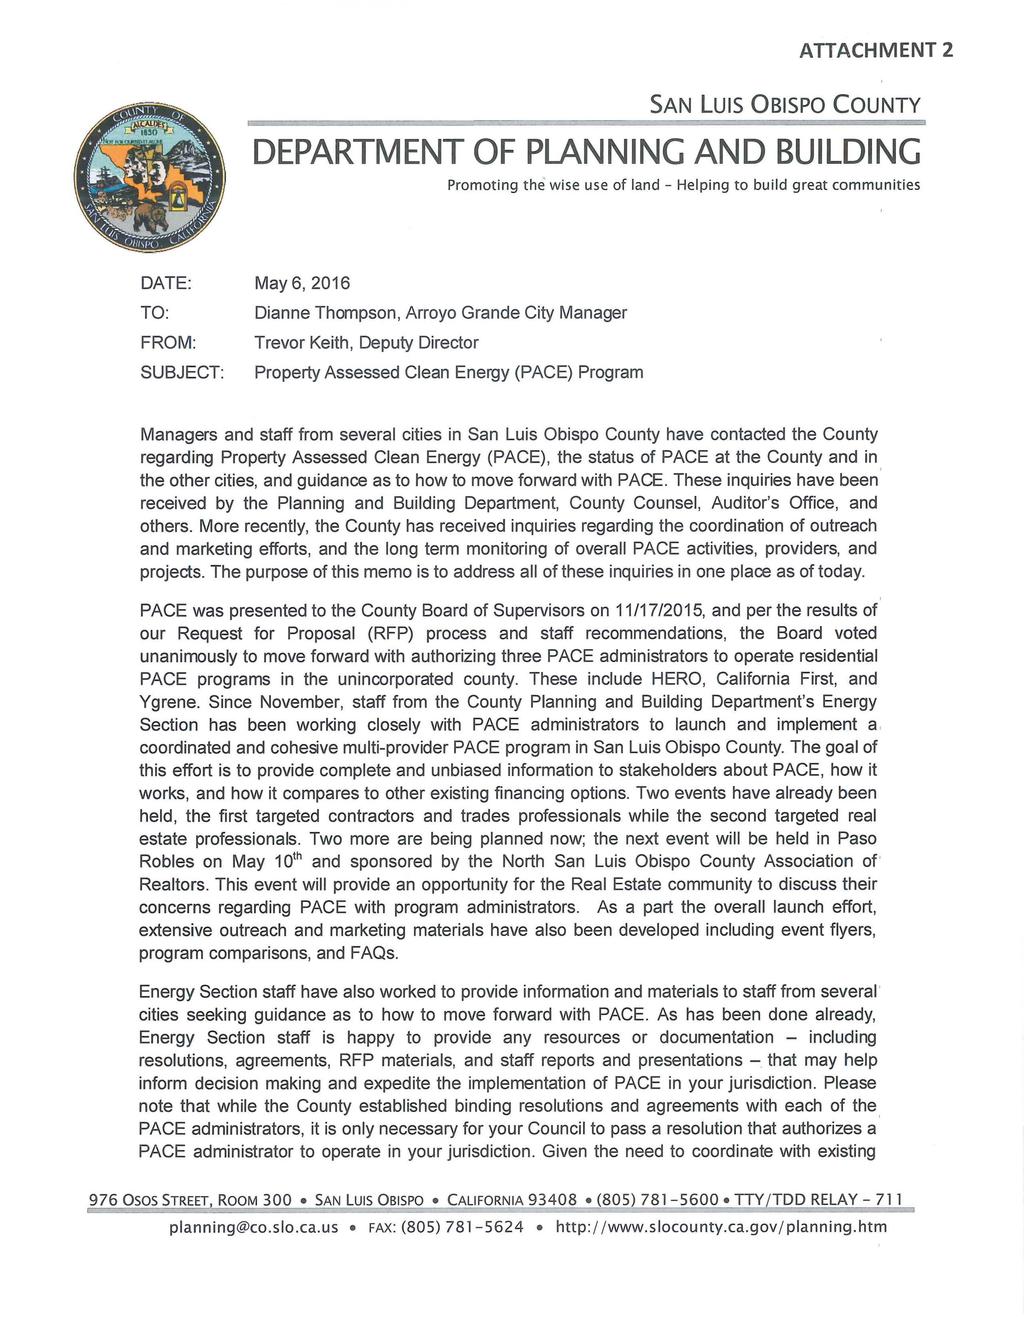 ATTACHMENT 2 SAN LUIS OBISPO COUNTY DEPARTM ENT OF PLANNING AND BUILDING Promoting the wise use of land - Helping to build great communities DATE: May 6, 2016 TO: Dianne Thompson, Arroyo Grande City